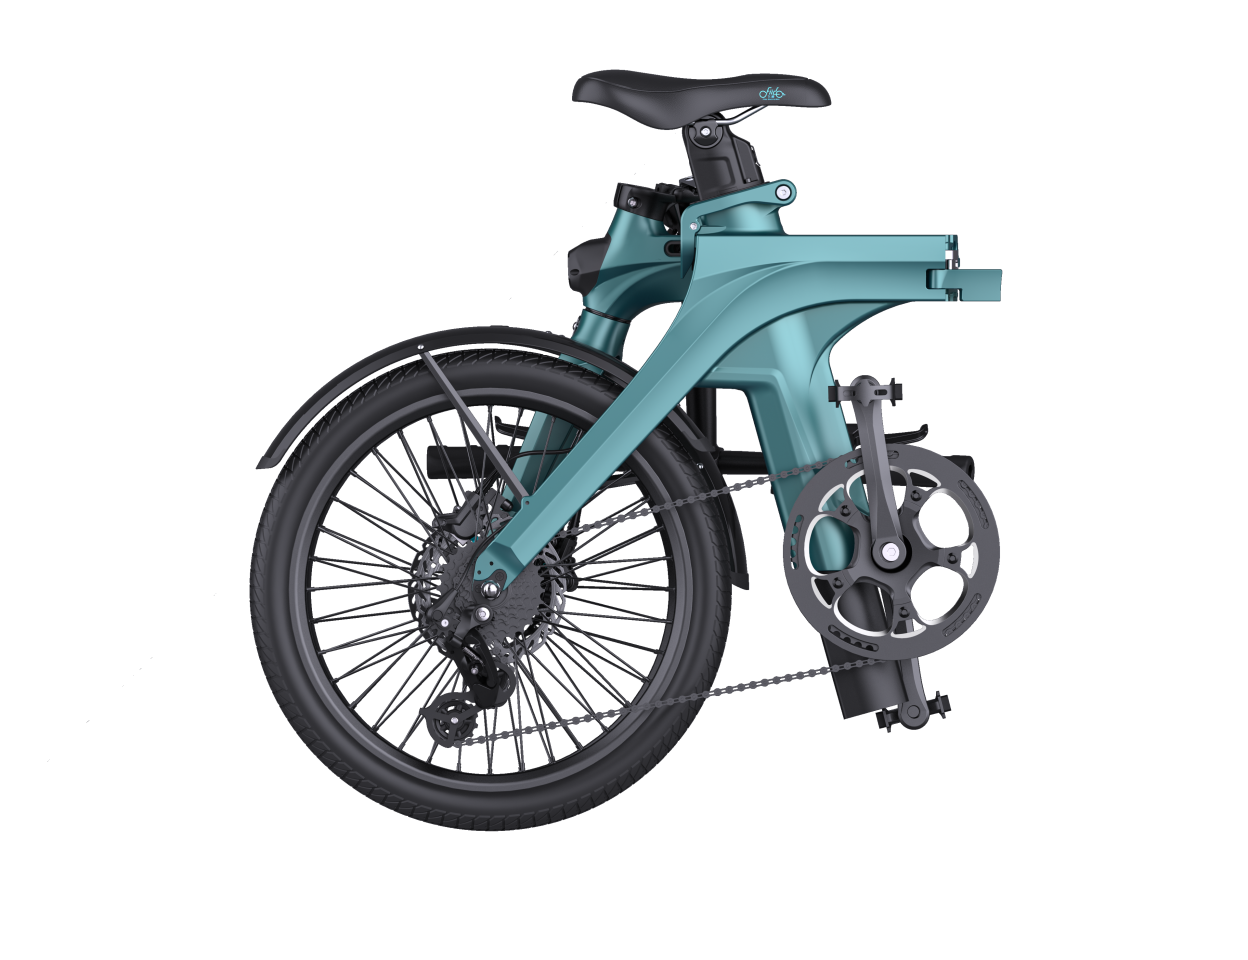 The Fiido X and X Lite ebikes each fold down to 84 x 40 x 59 cm for between-ride transport ease